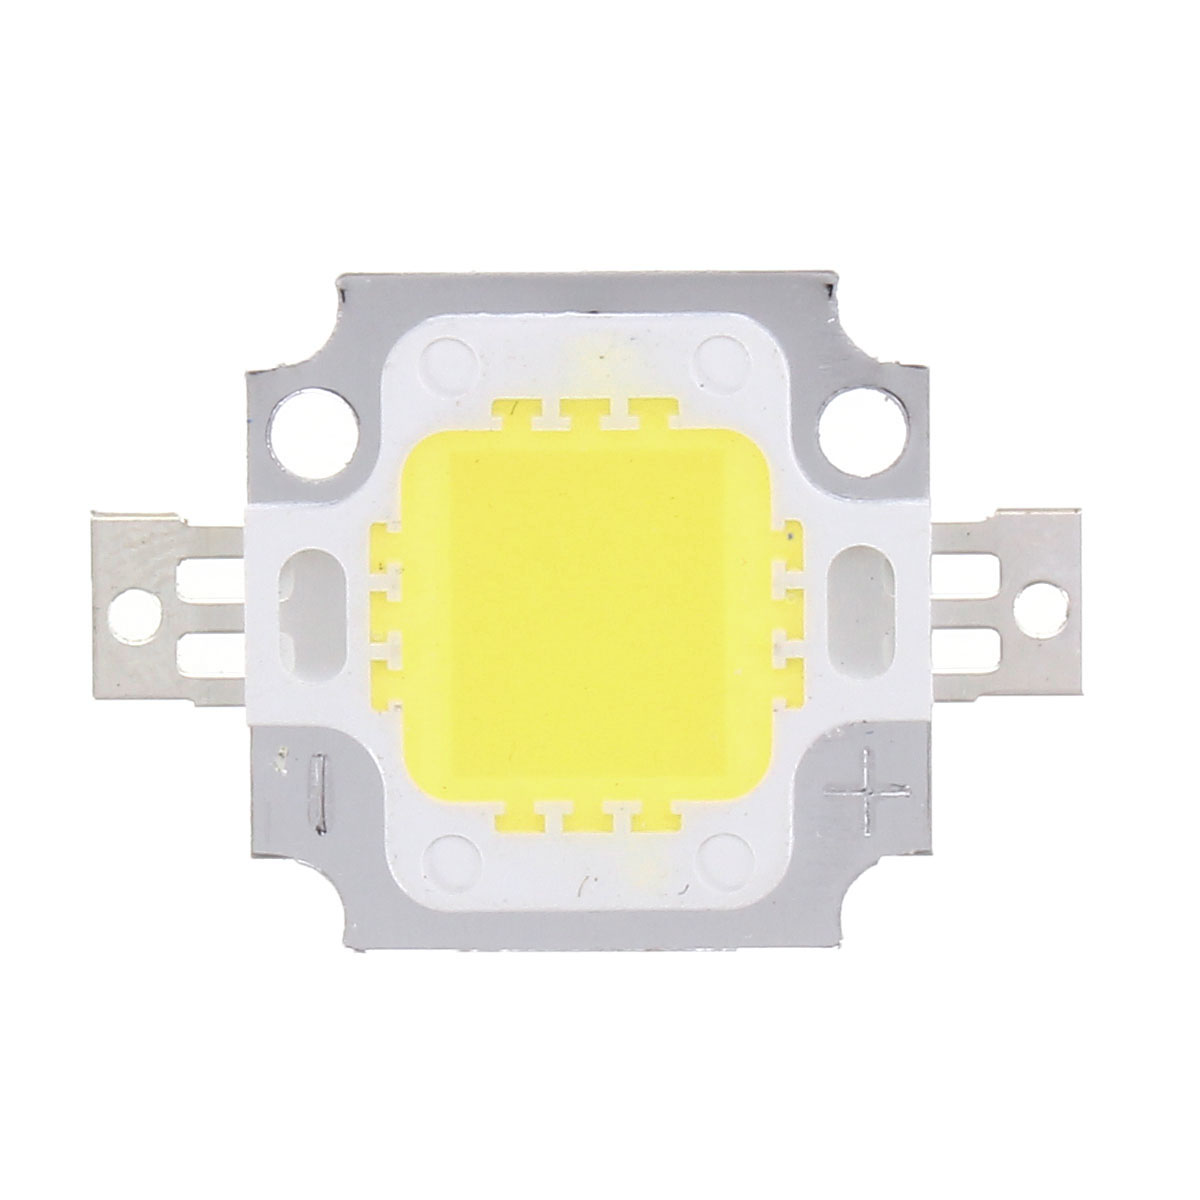 5W-Waterproof-High-Power-Supply-SMD-Chip--LED-Driver-for-DIY-Flood-Light-AC85-265V-1160477-3